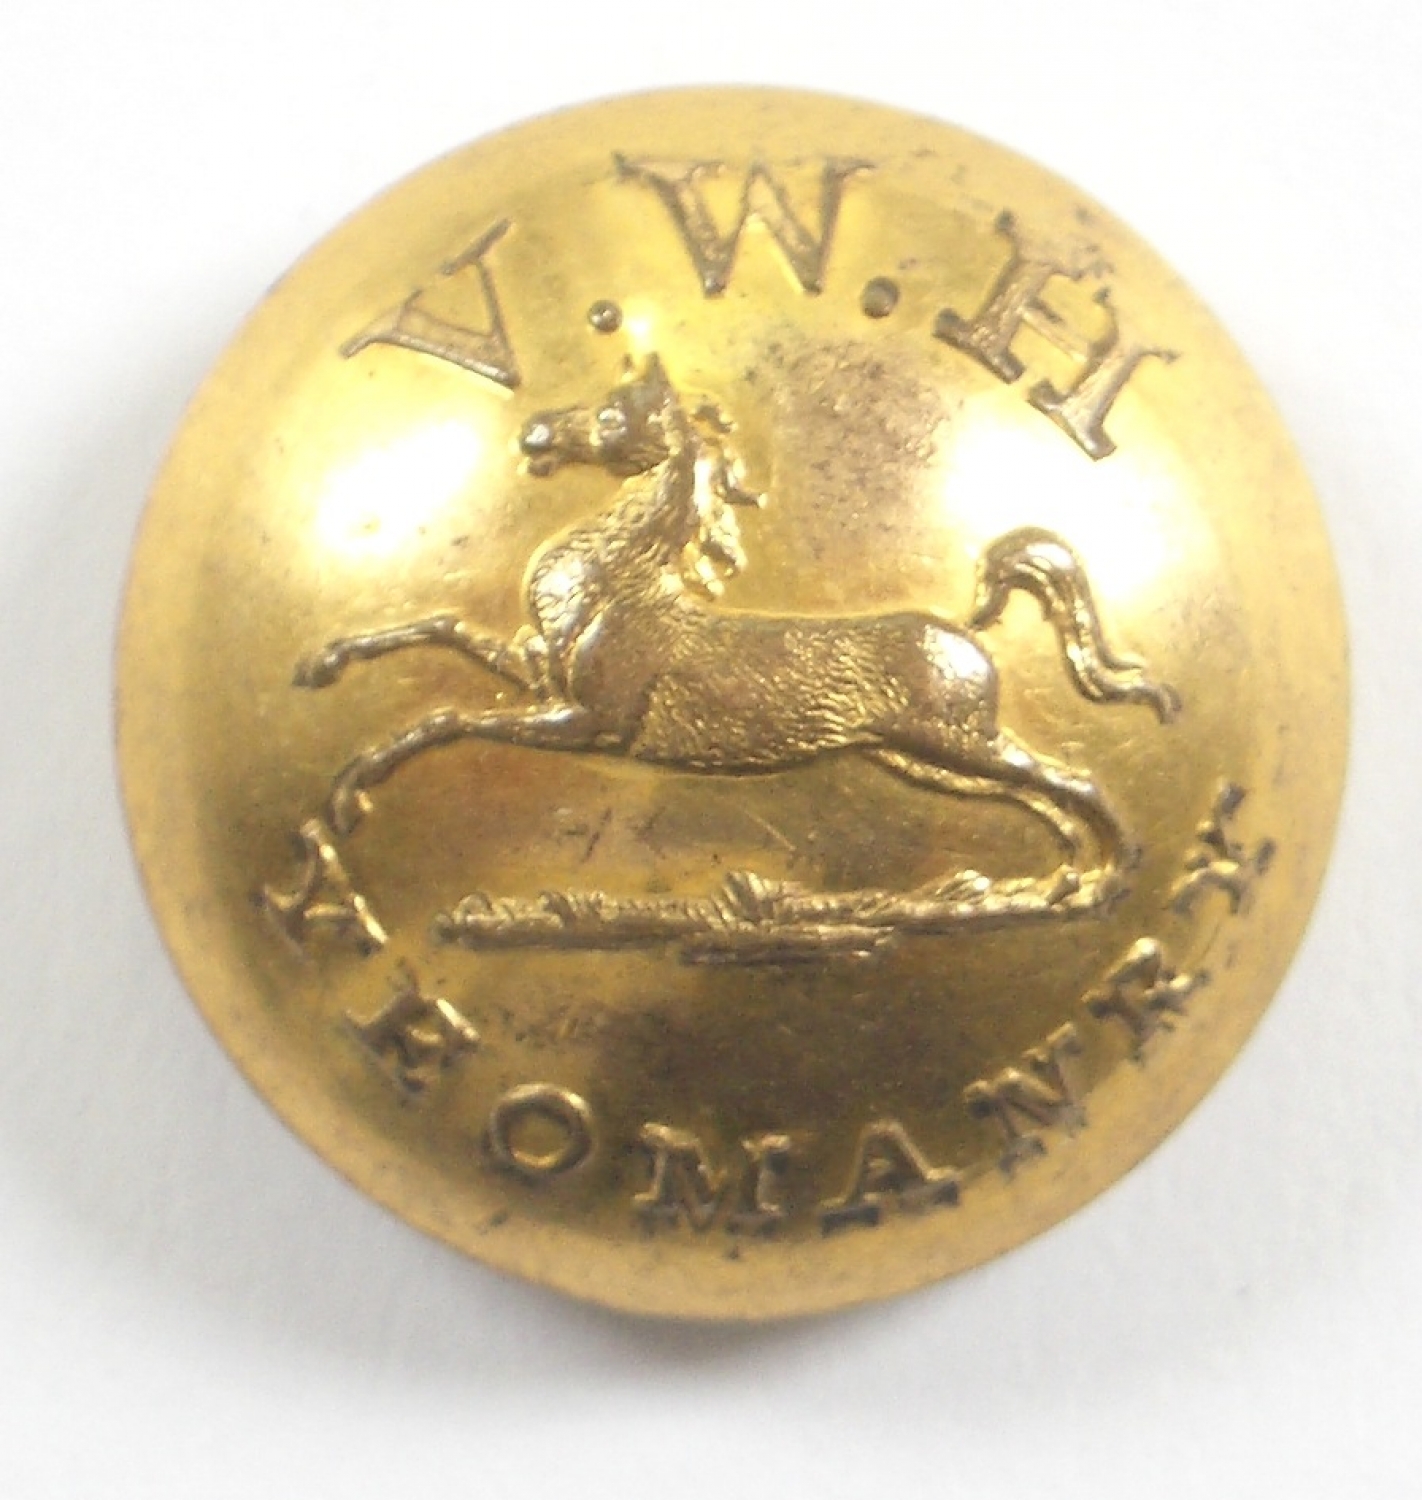 Vale of White Horse Yeomanry button